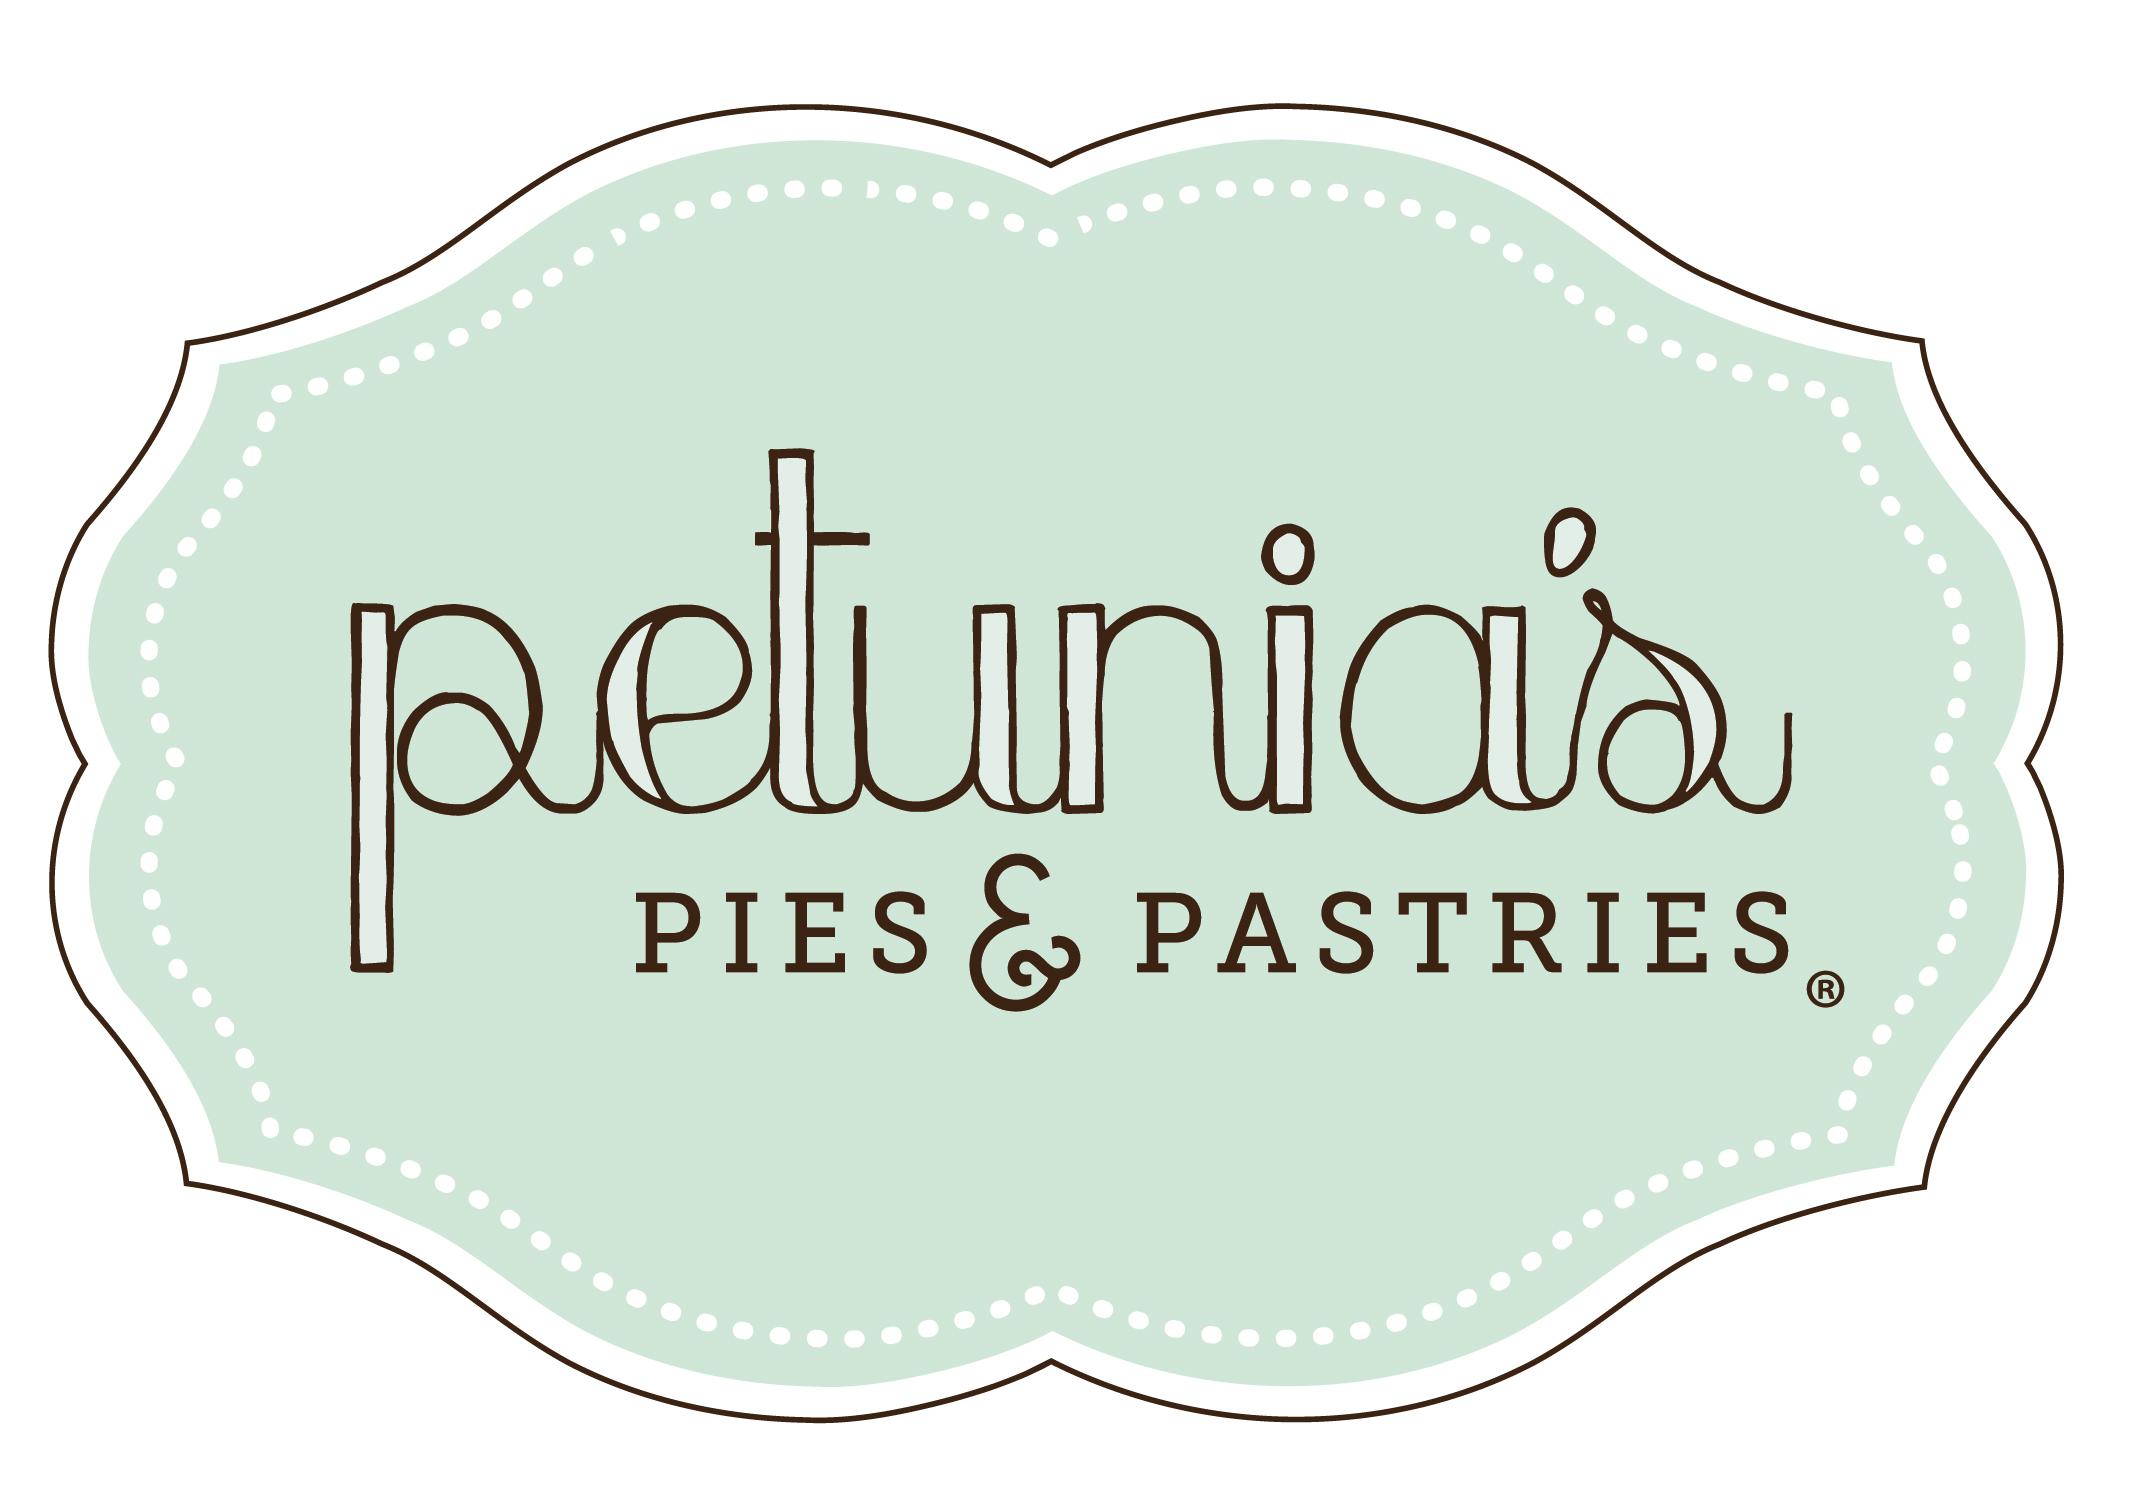 Petunia's Pies and Pastries